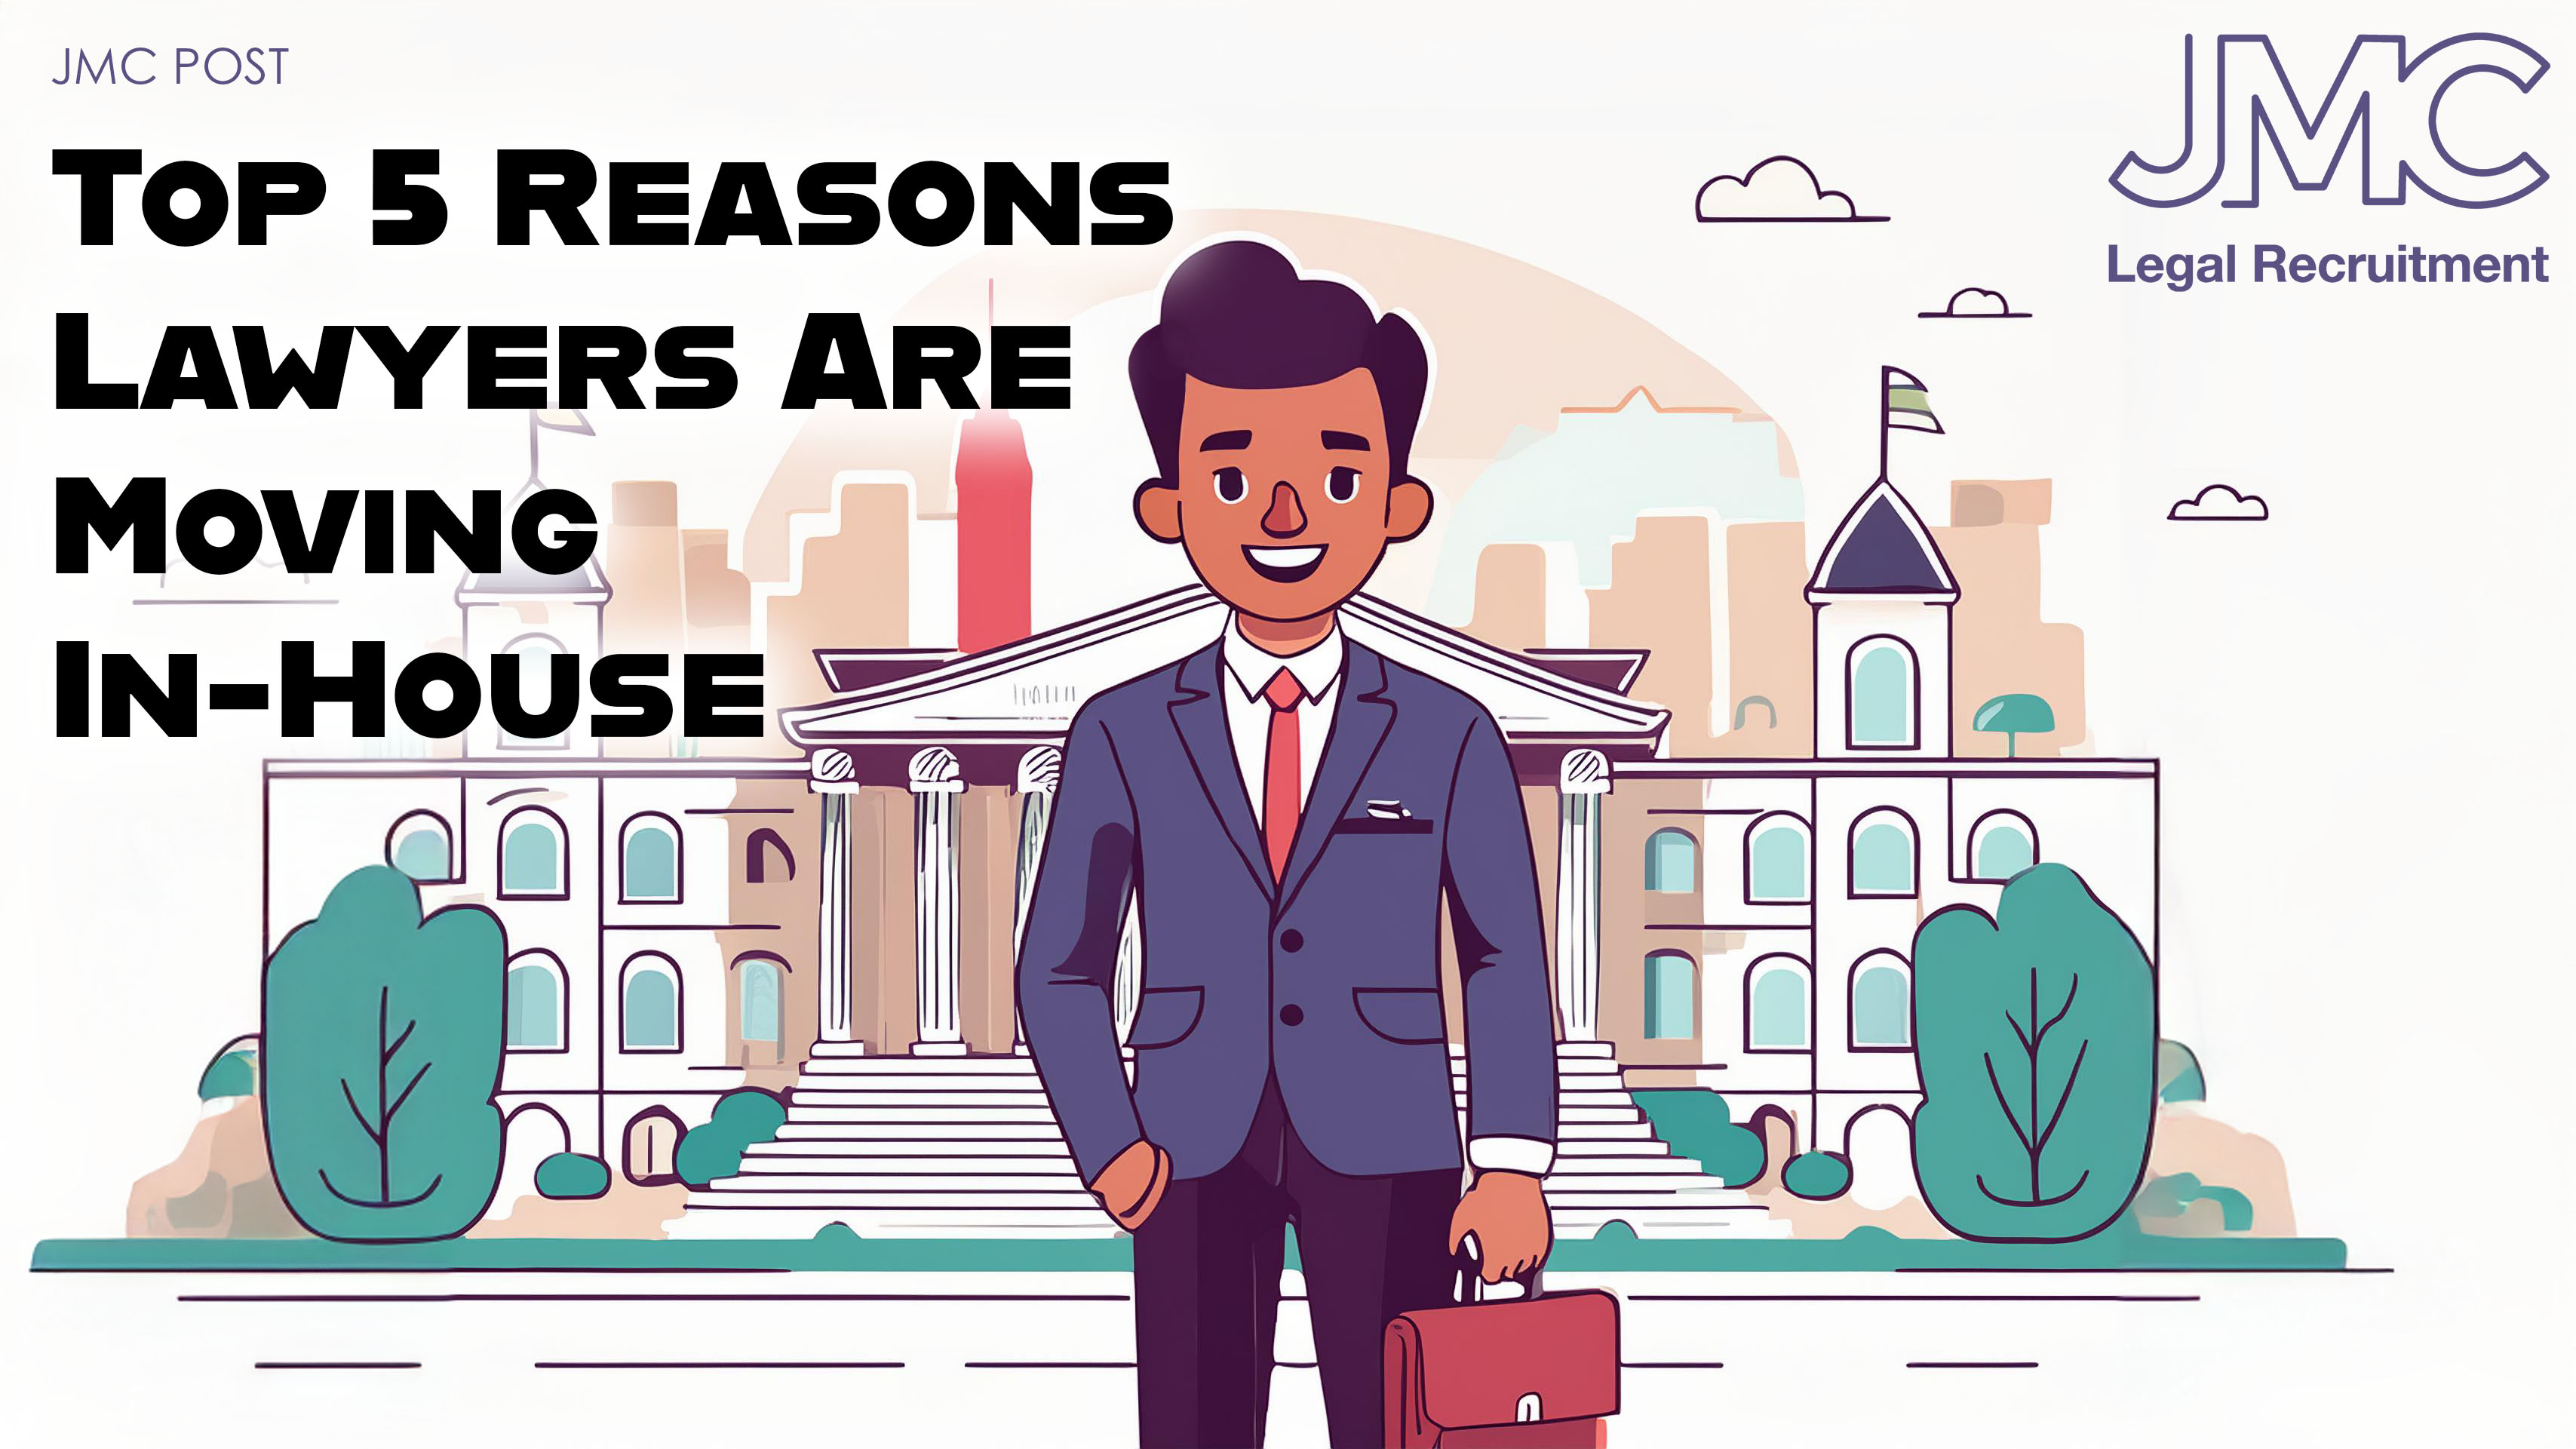 Top 5 Reasons Lawyers Are Moving In-House